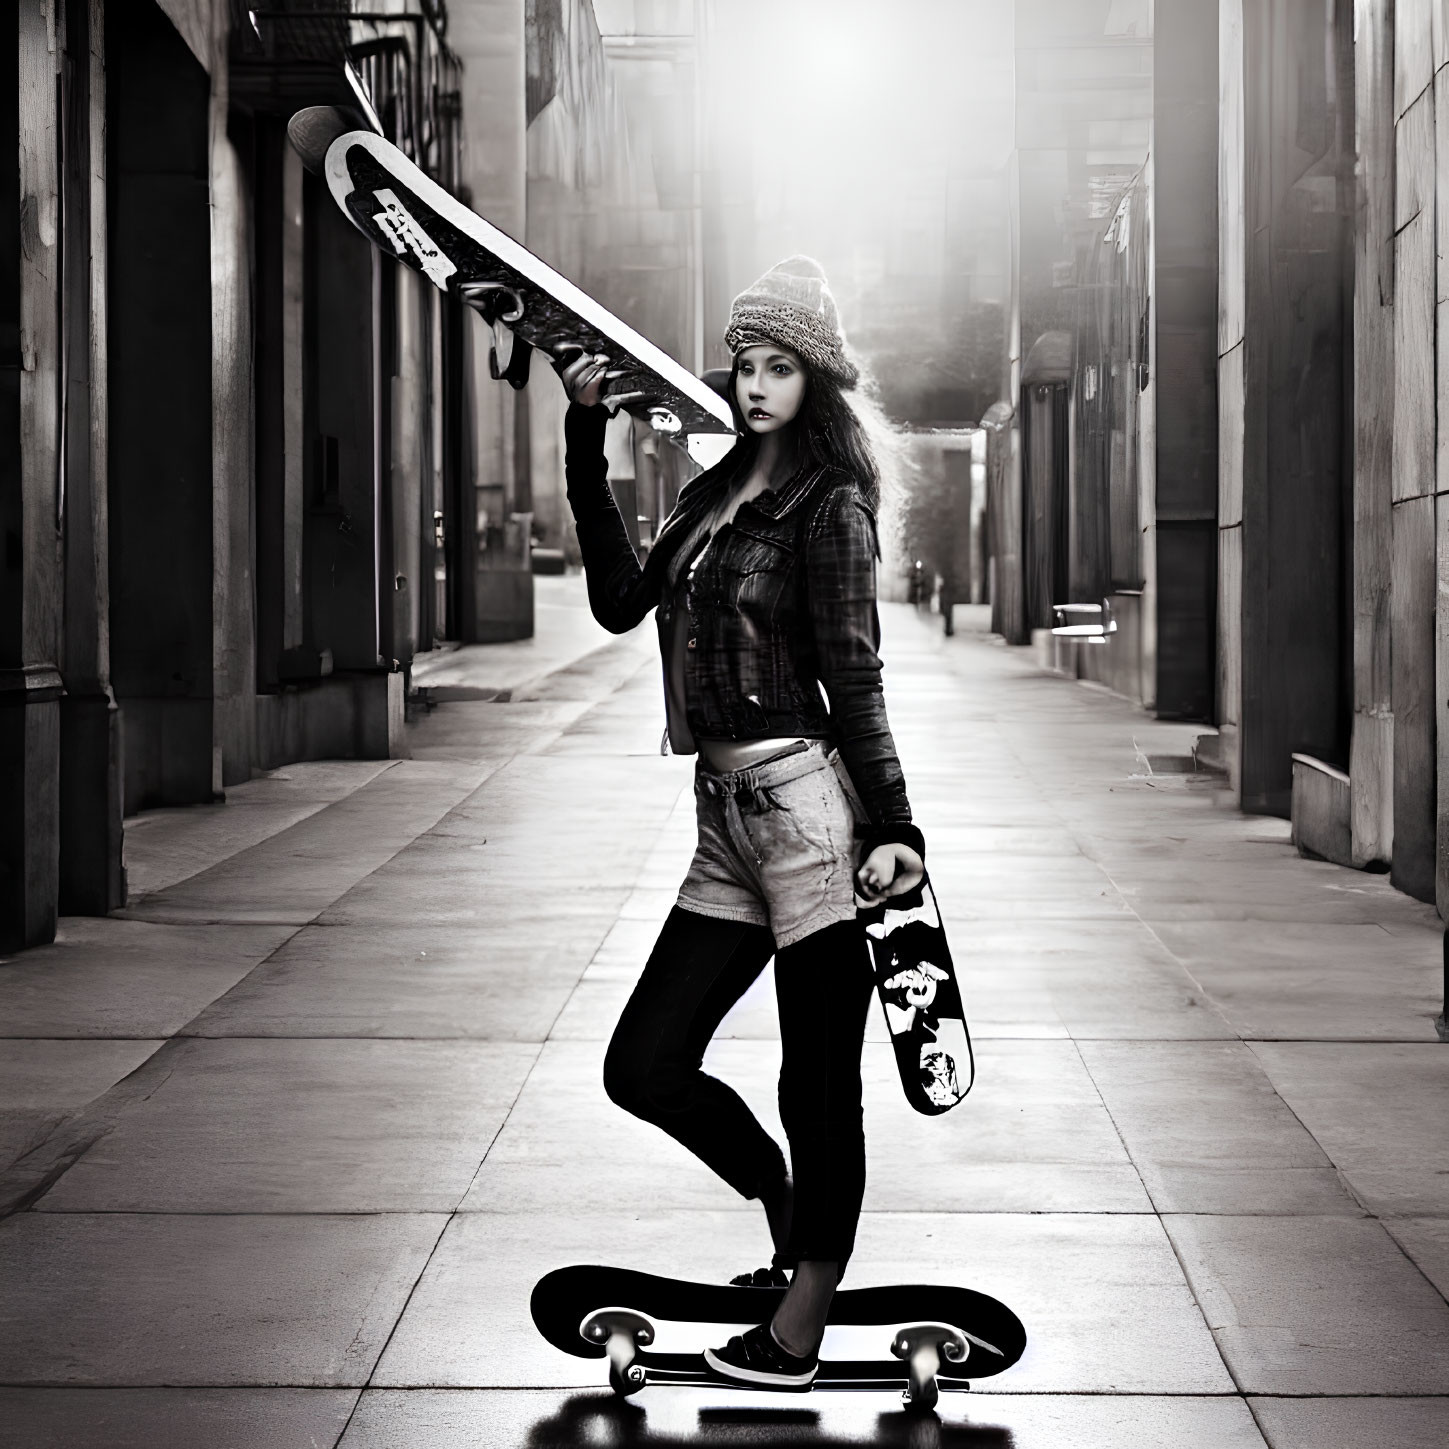 Fashionable youth with skateboard poses in urban alley in trendy attire